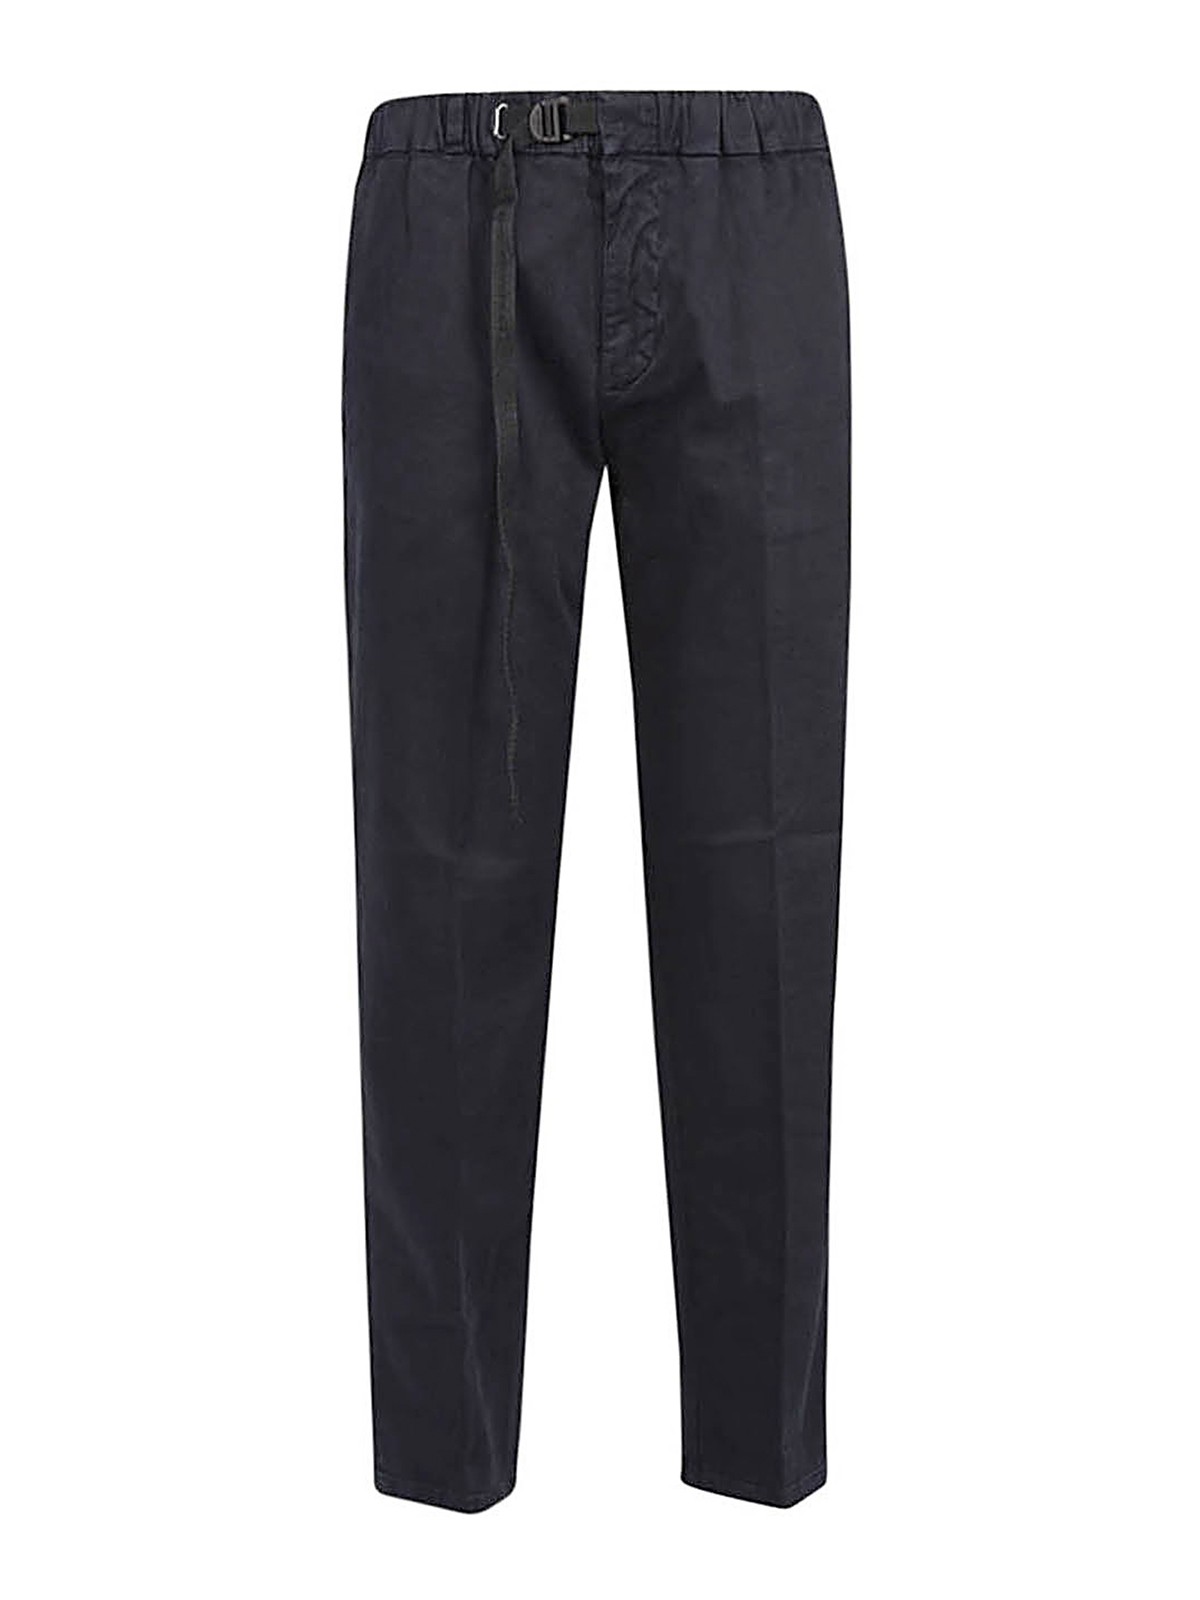 White Sand Cotton Trousers In Black